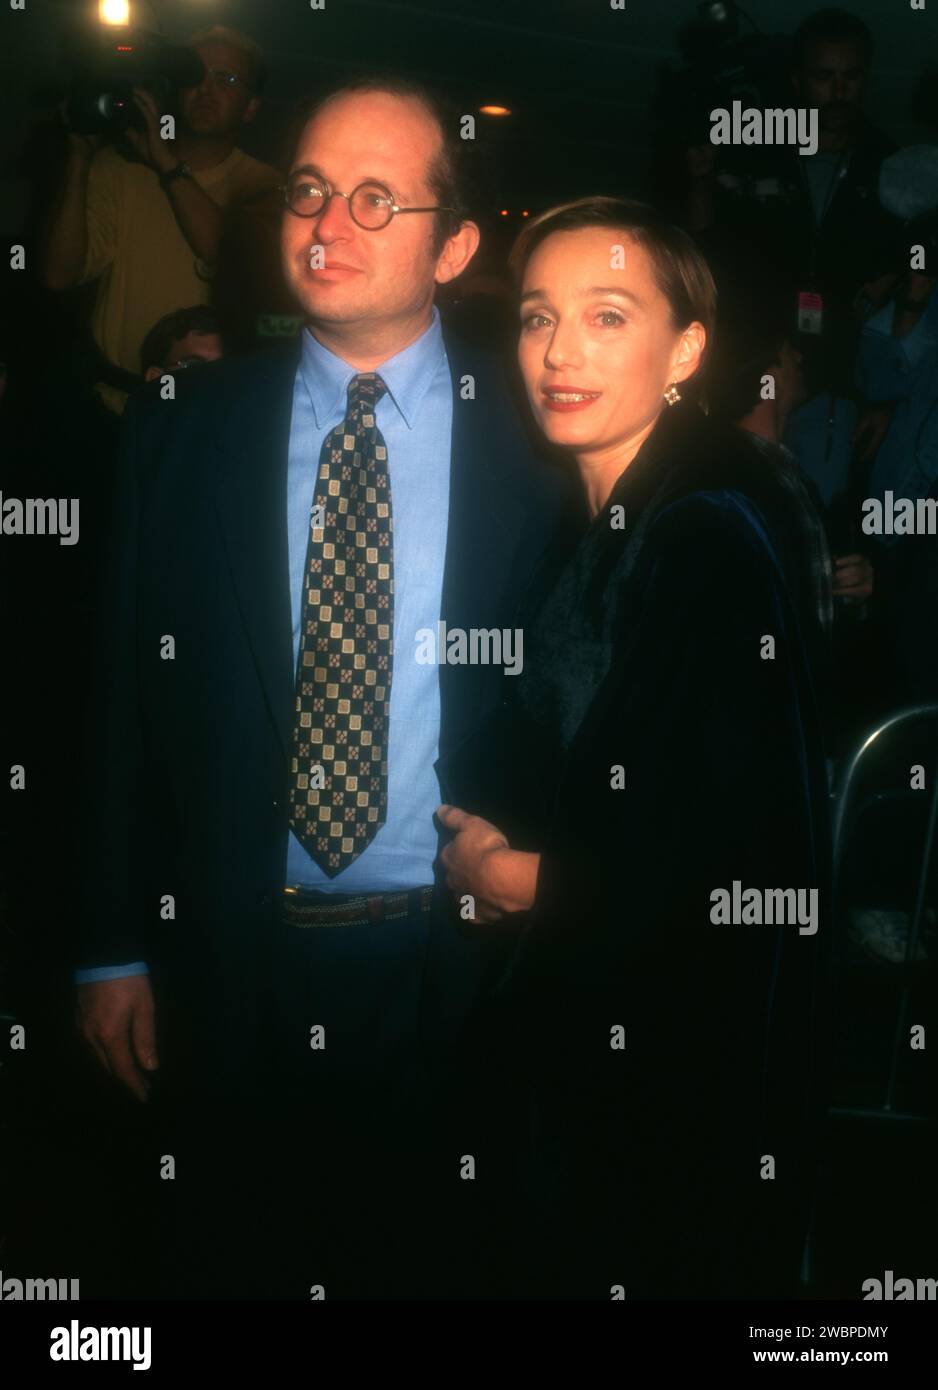 Los Angeles, California, USA 6th November 1996 Actress Kristin Scott Thomas attends The American Film Institute's Premiere of Miramax Films 'The English Patient' at Mann Bruin Theatre on November 6, 1996 in Los Angeles, California, USA. Photo by Barry King/Alamy Stock Photo Stock Photo